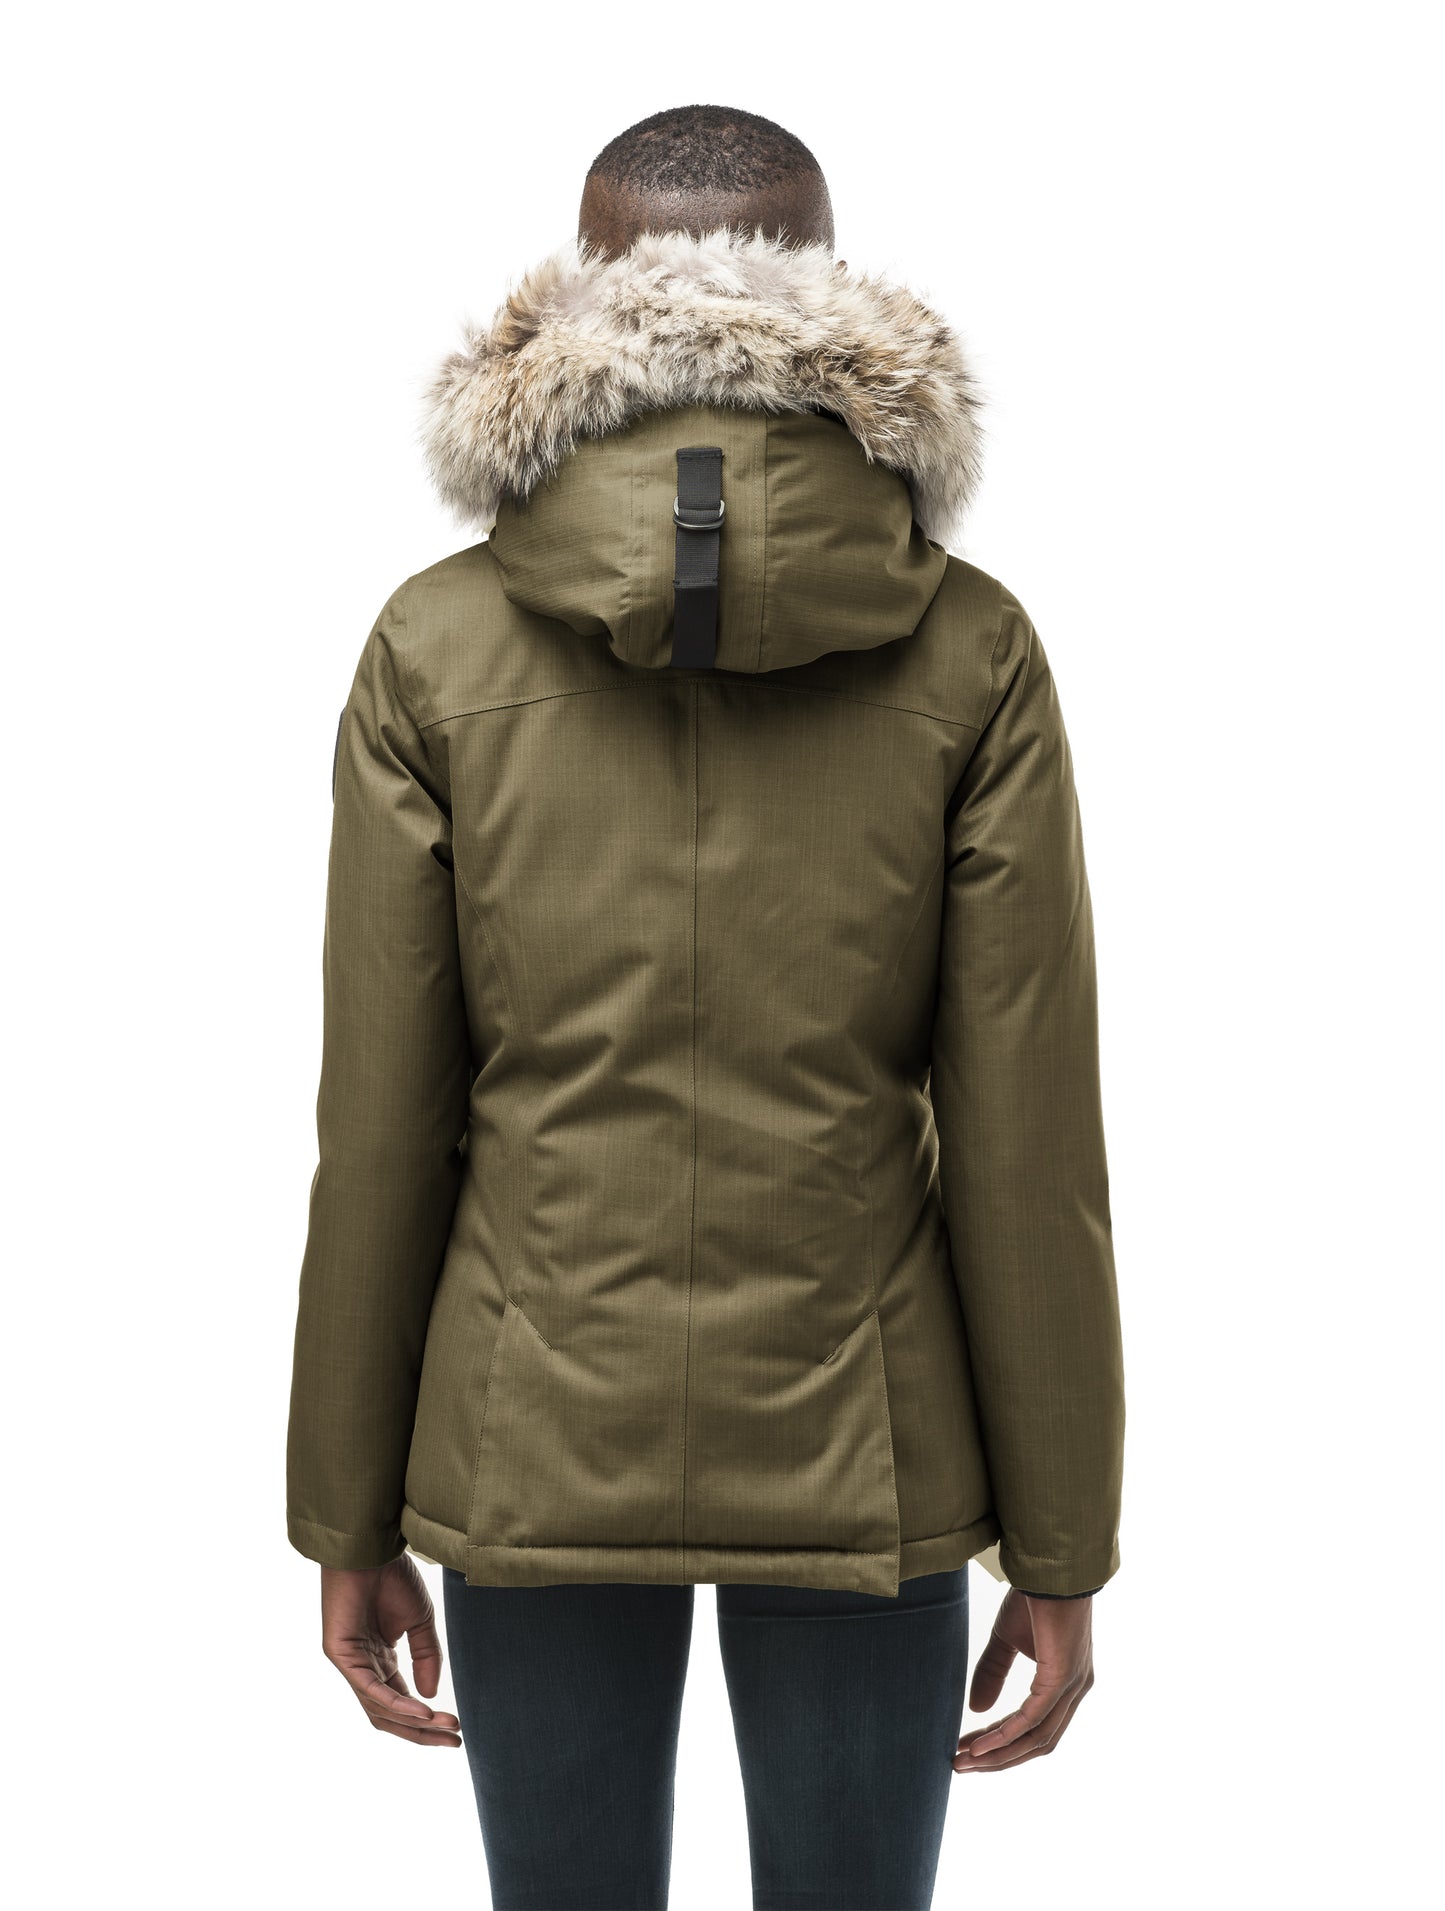 Women's hip length down filled parka in CH Army Green